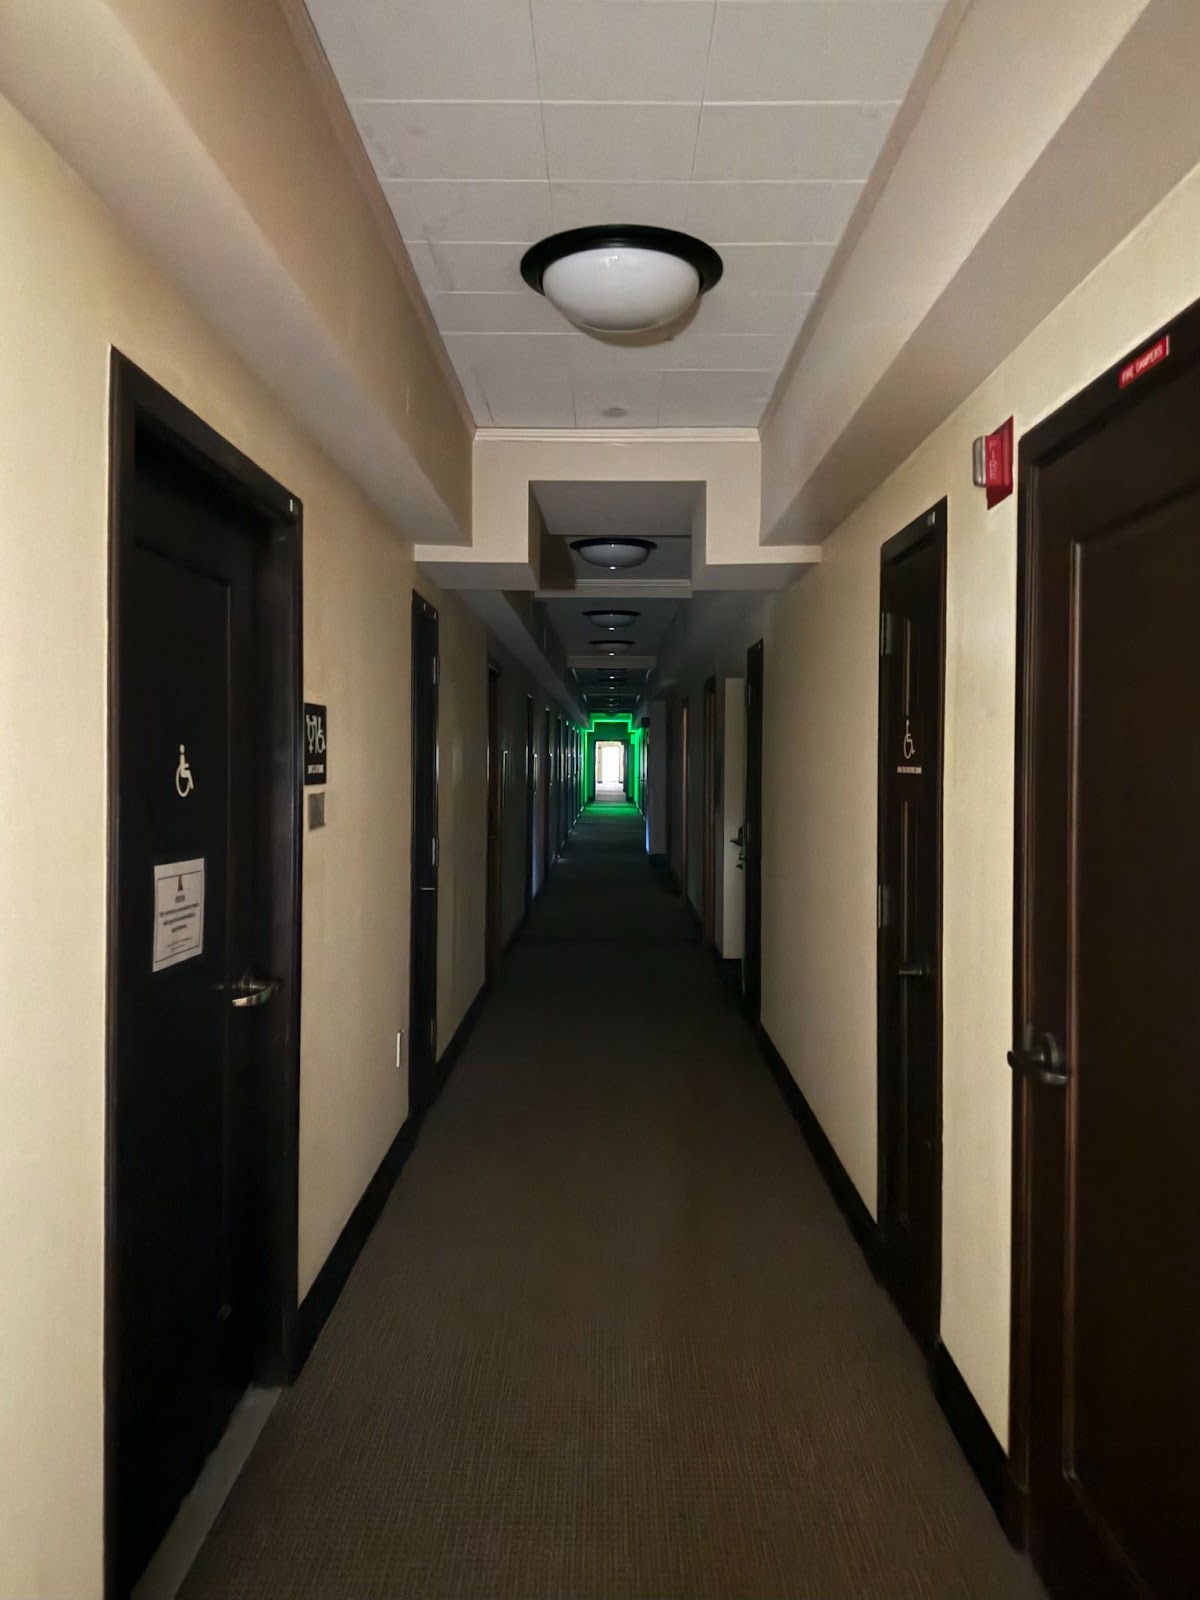 I-House with the lights out, and only the sunlight to illuminate the corridor.